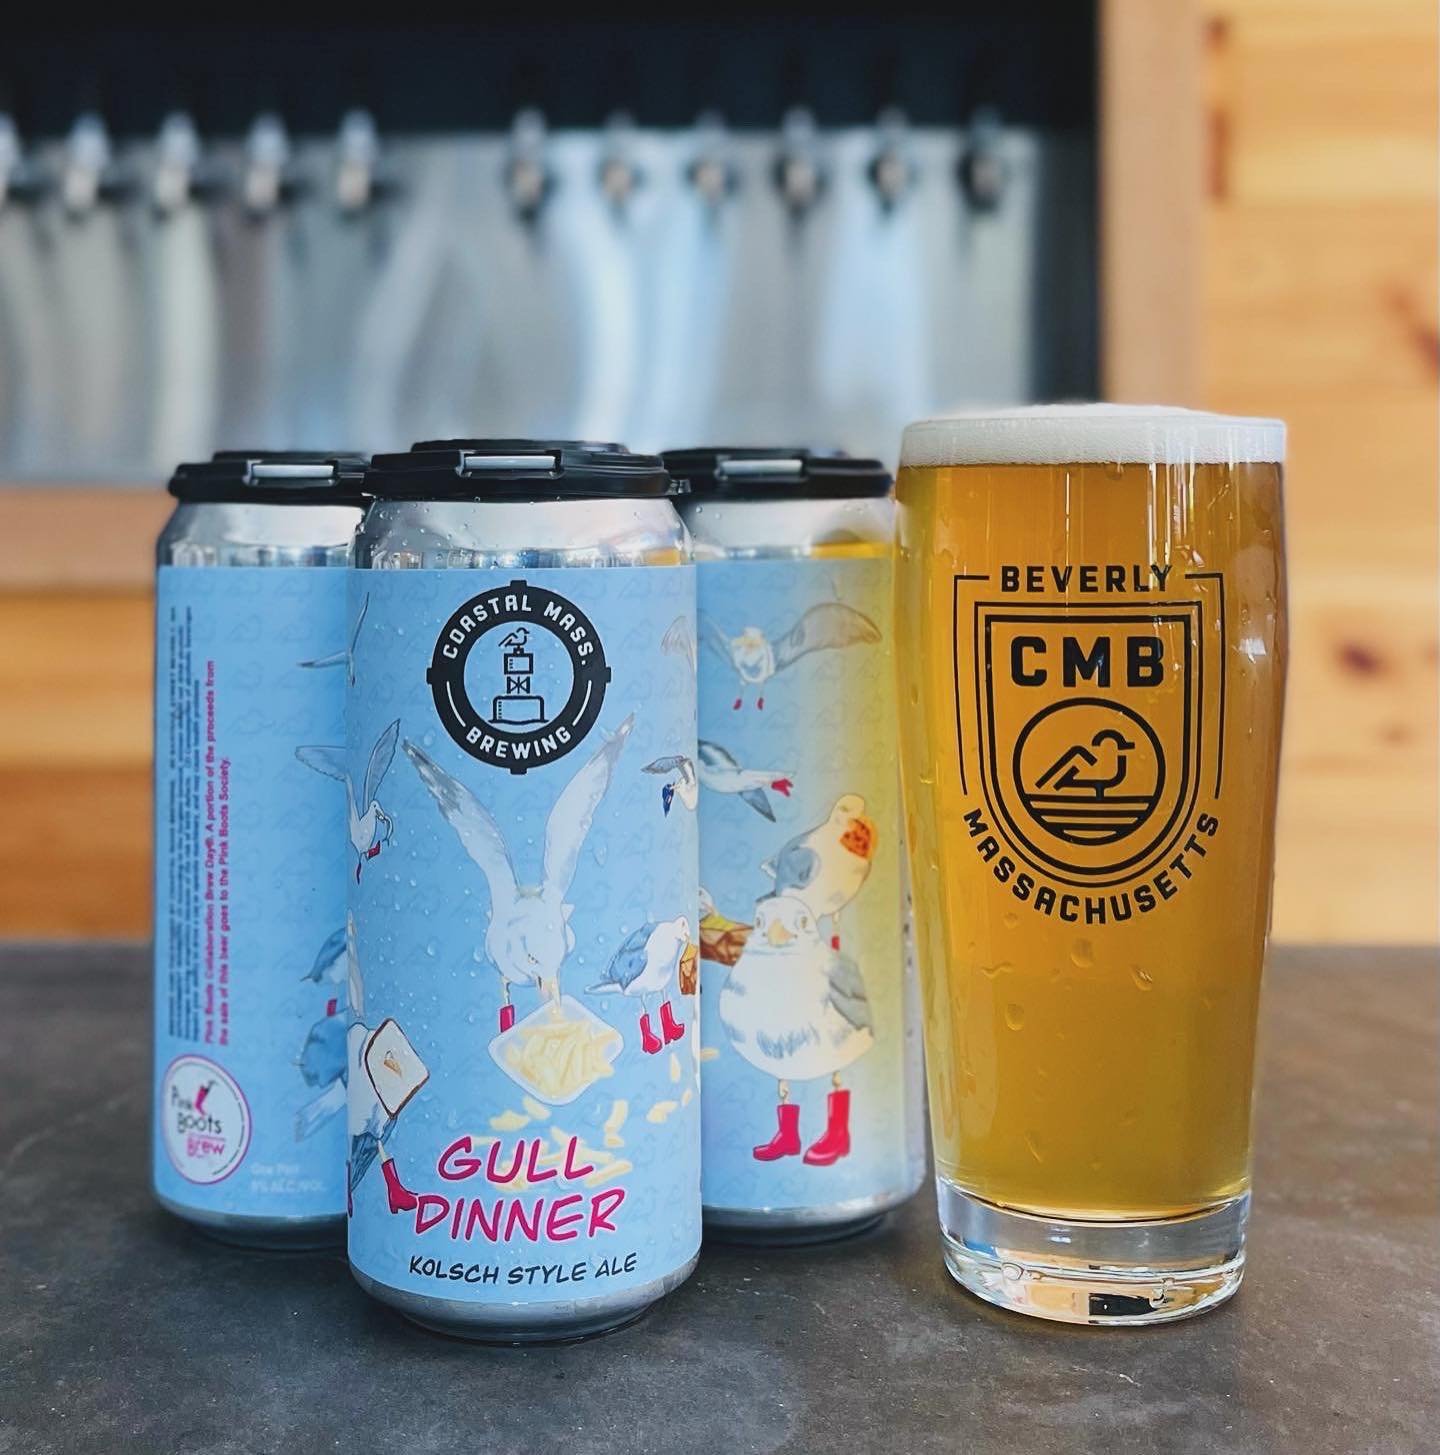 🚨BEER RELEASE PART TWO: GULL DINNER🚨

Introducing Gull Dinner, a 5% Kolsch Style Ale crafted by the talented women of CMB!

Our Pink Boots collaboration brew begins with Girl Power Pilsner malt from Valley Malt, a female-owned maltster. This choice